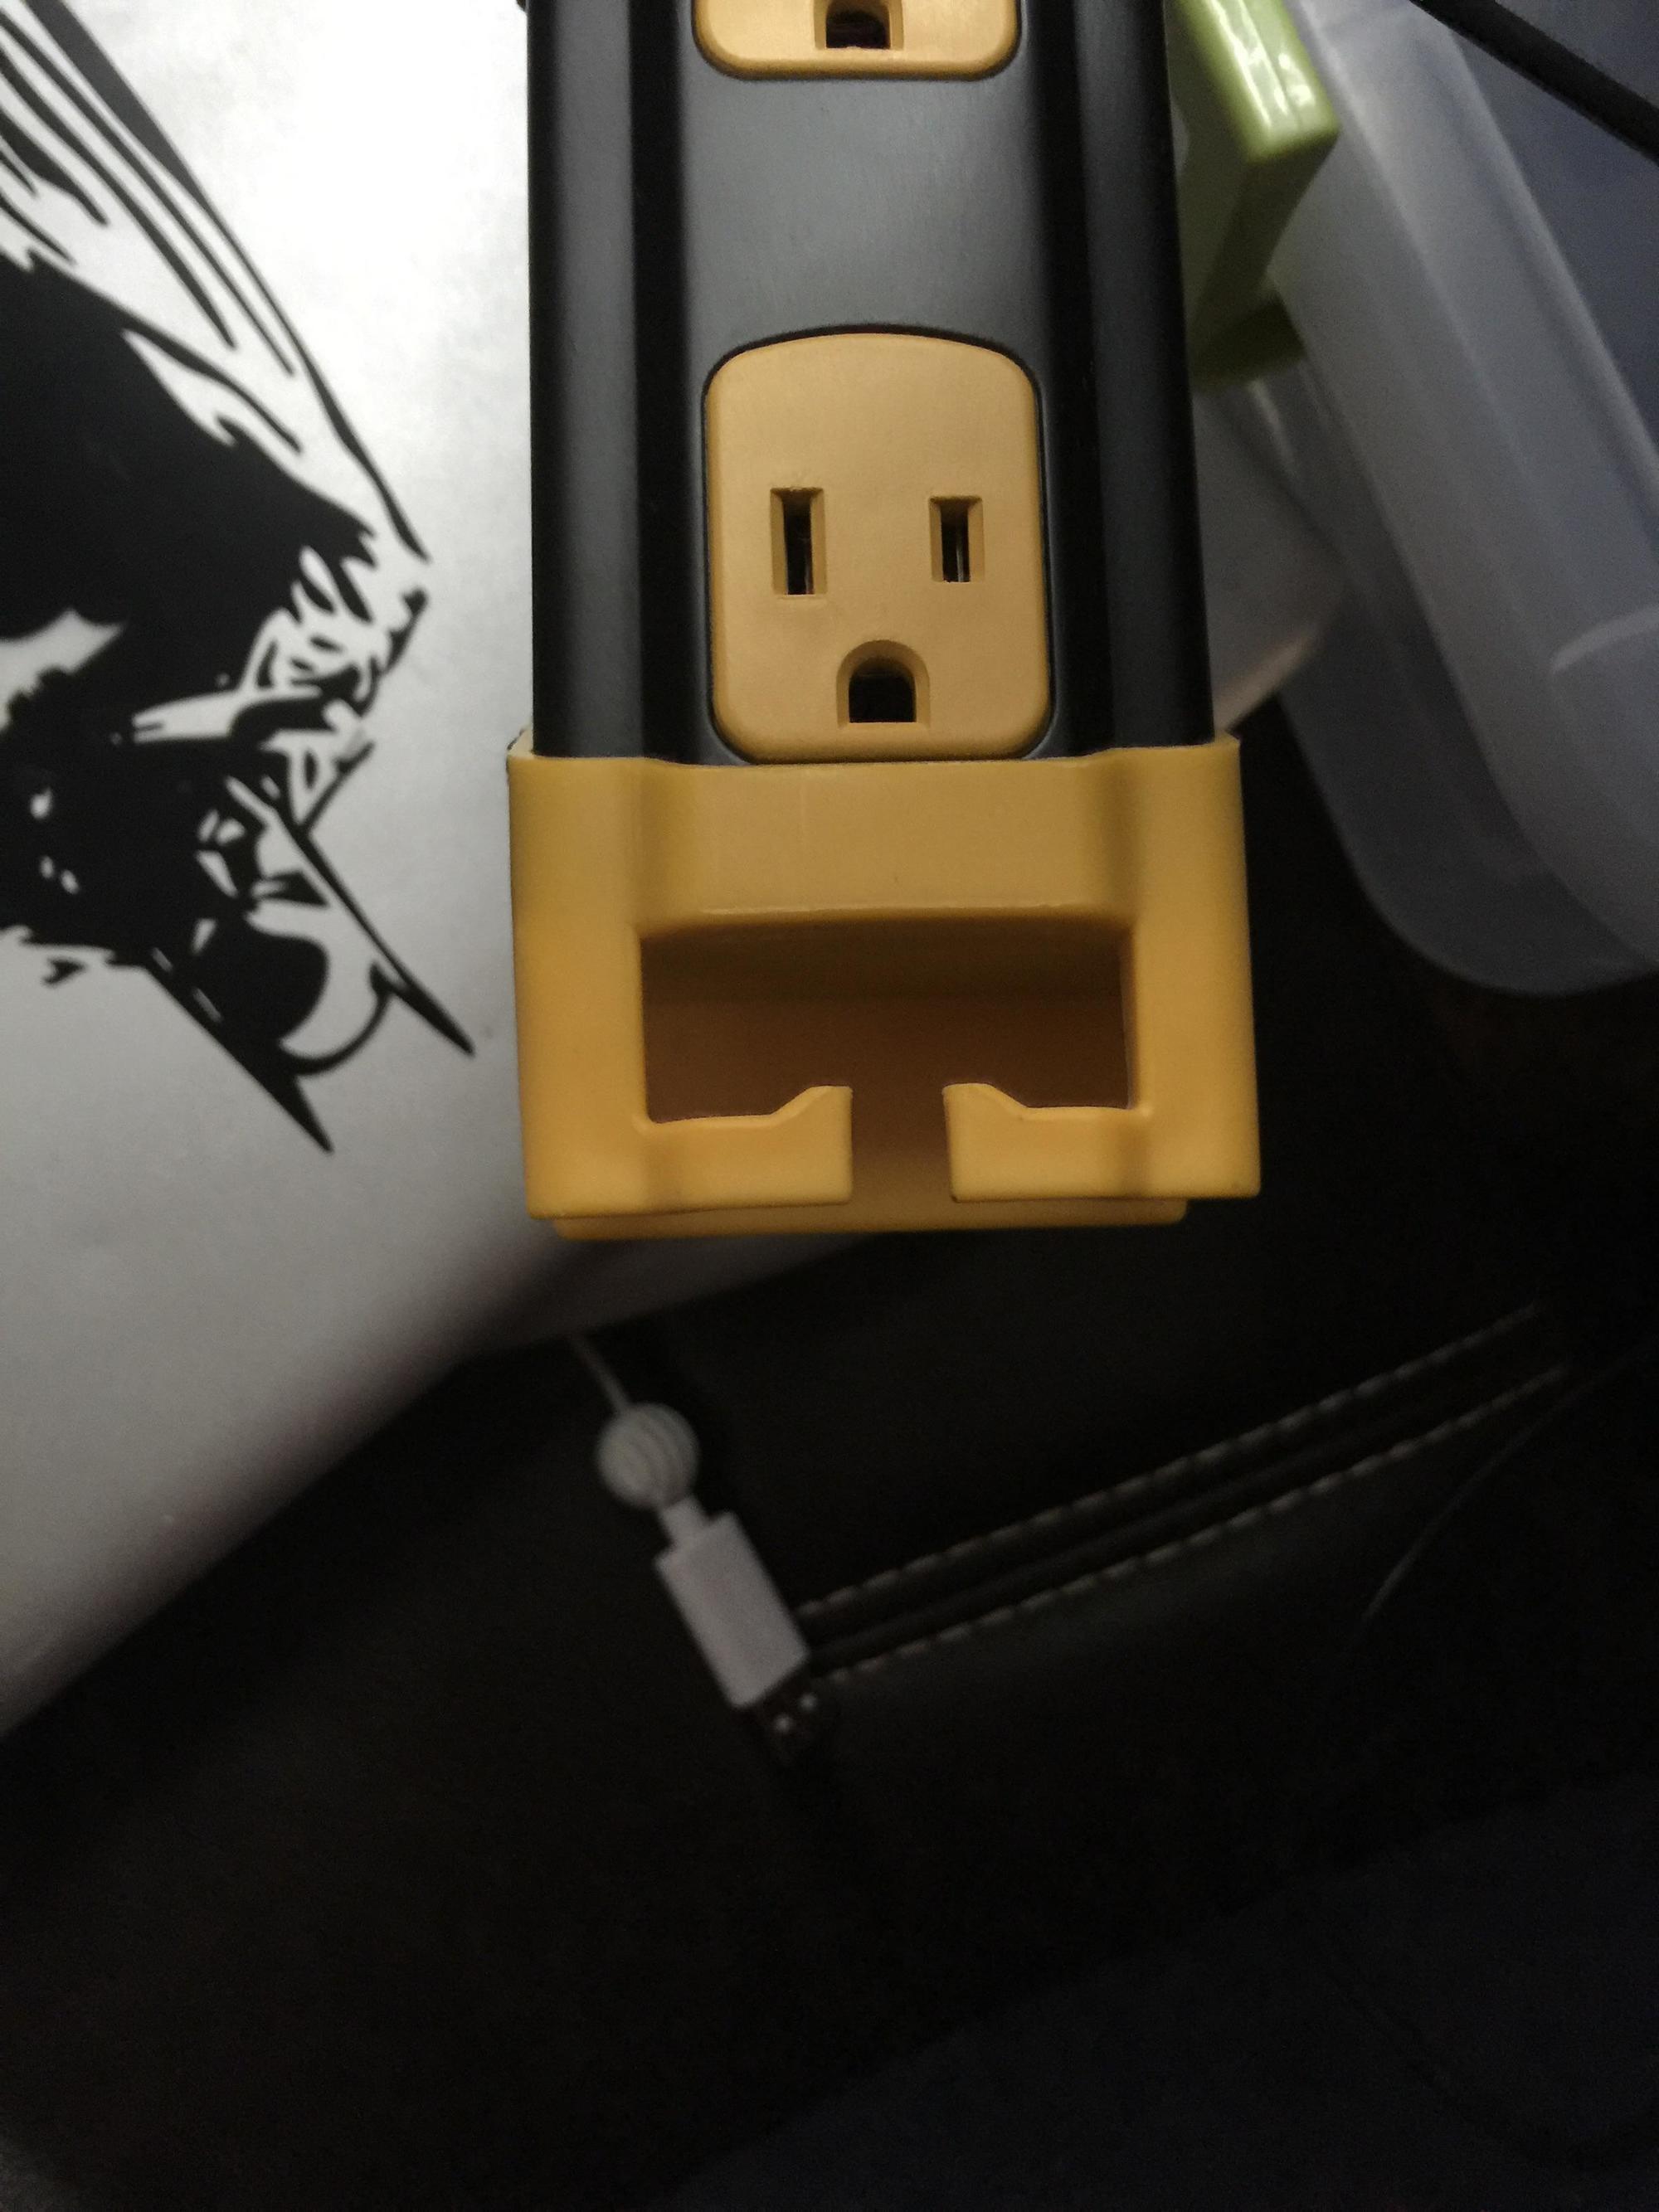 The power strip outlet that looks like a tough guy.